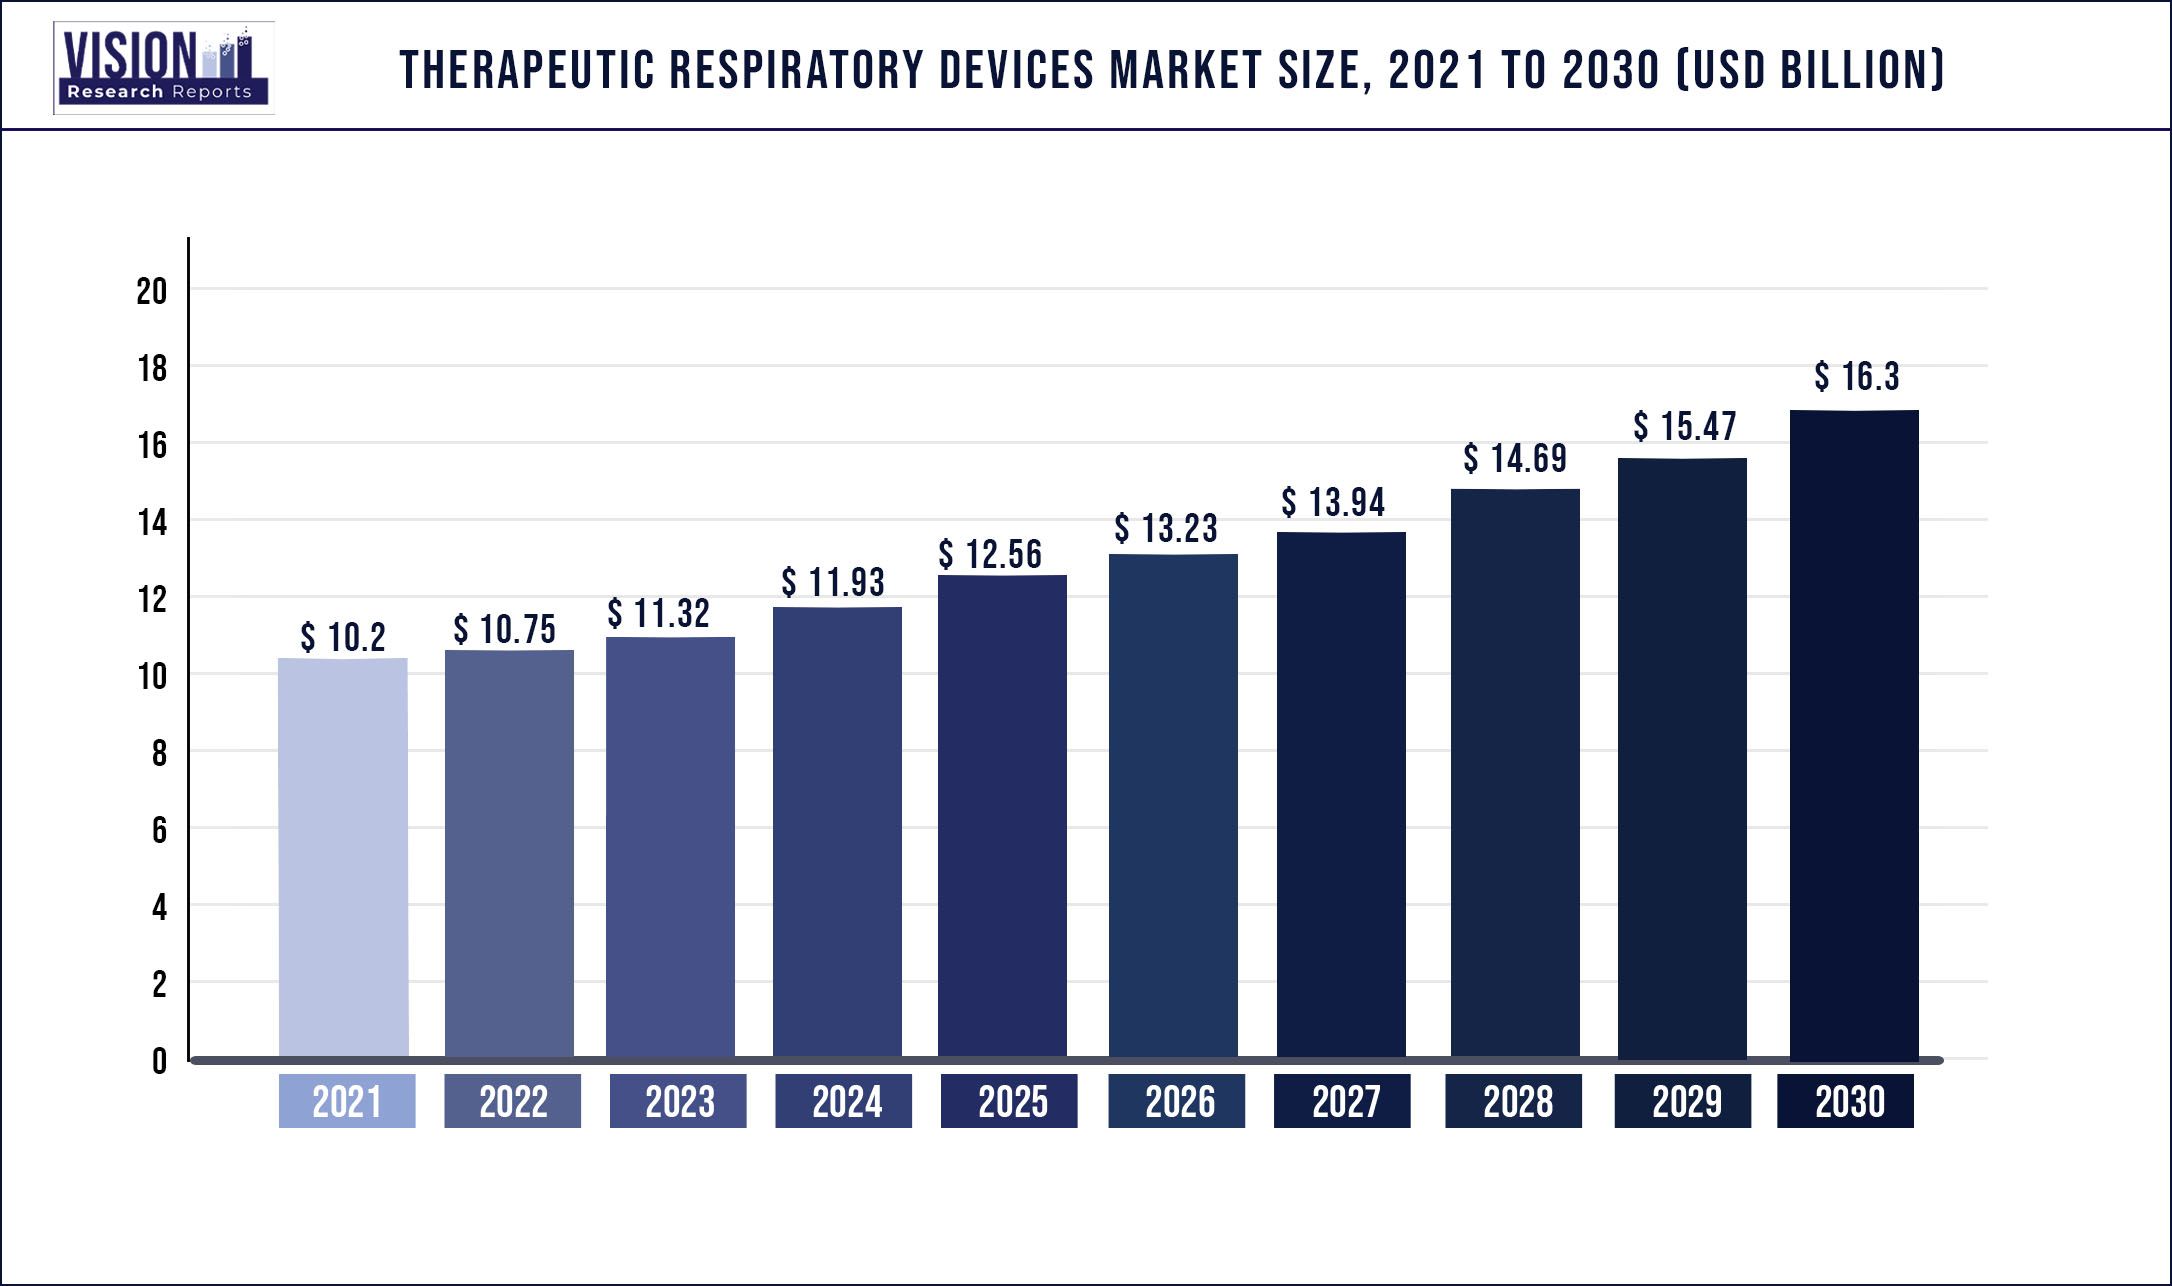 Therapeutic Respiratory Devices Market Size 2021 to 2030